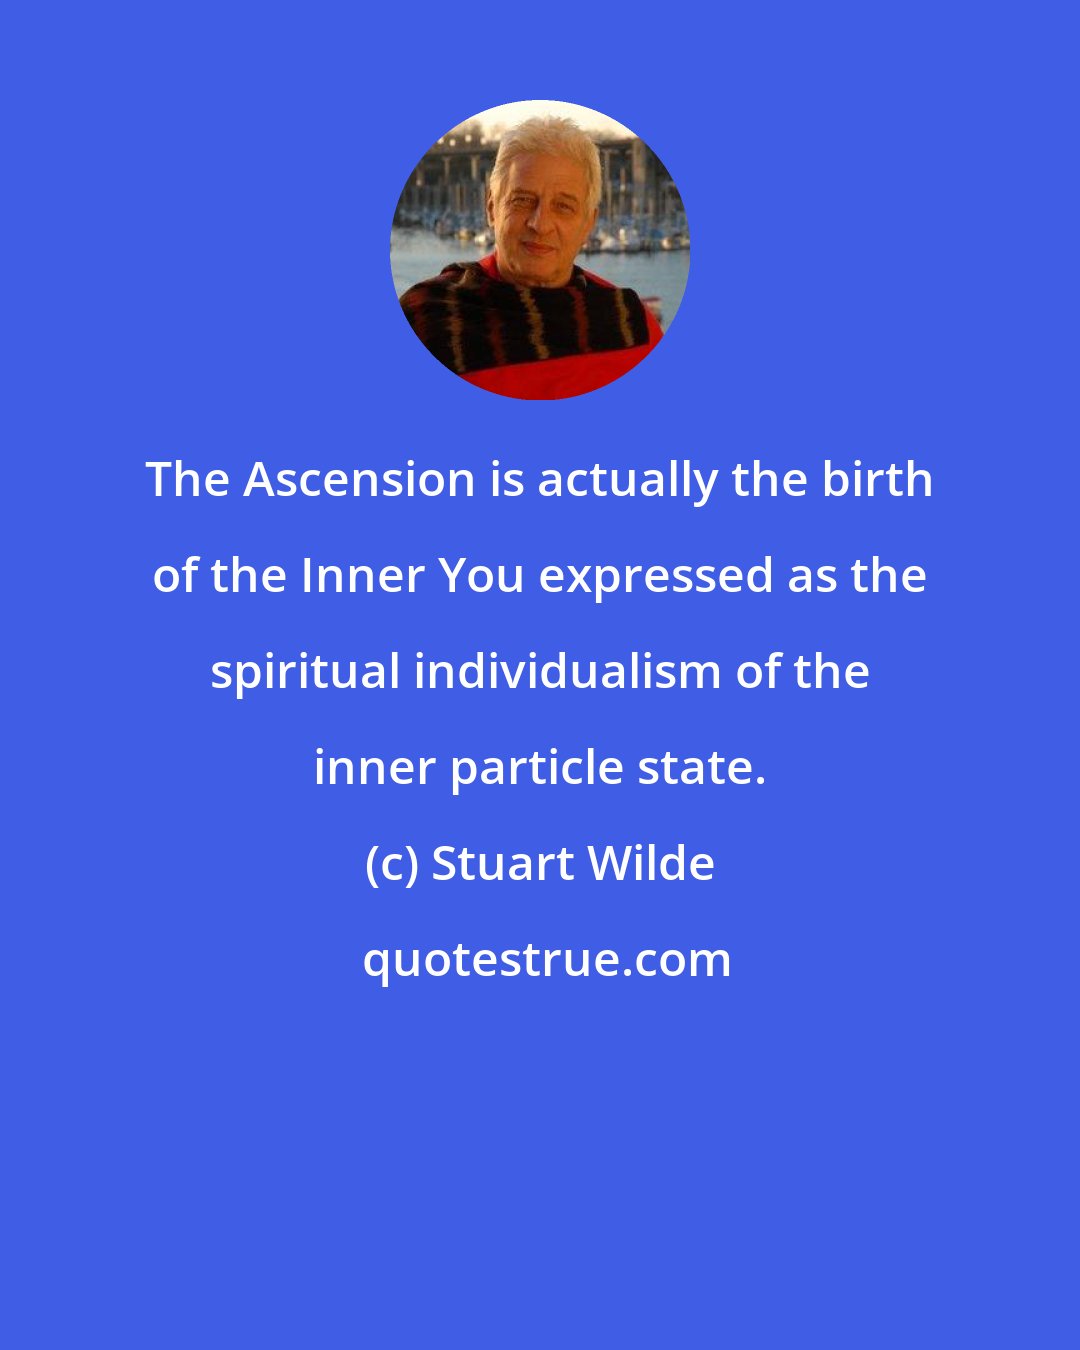 Stuart Wilde: The Ascension is actually the birth of the Inner You expressed as the spiritual individualism of the inner particle state.